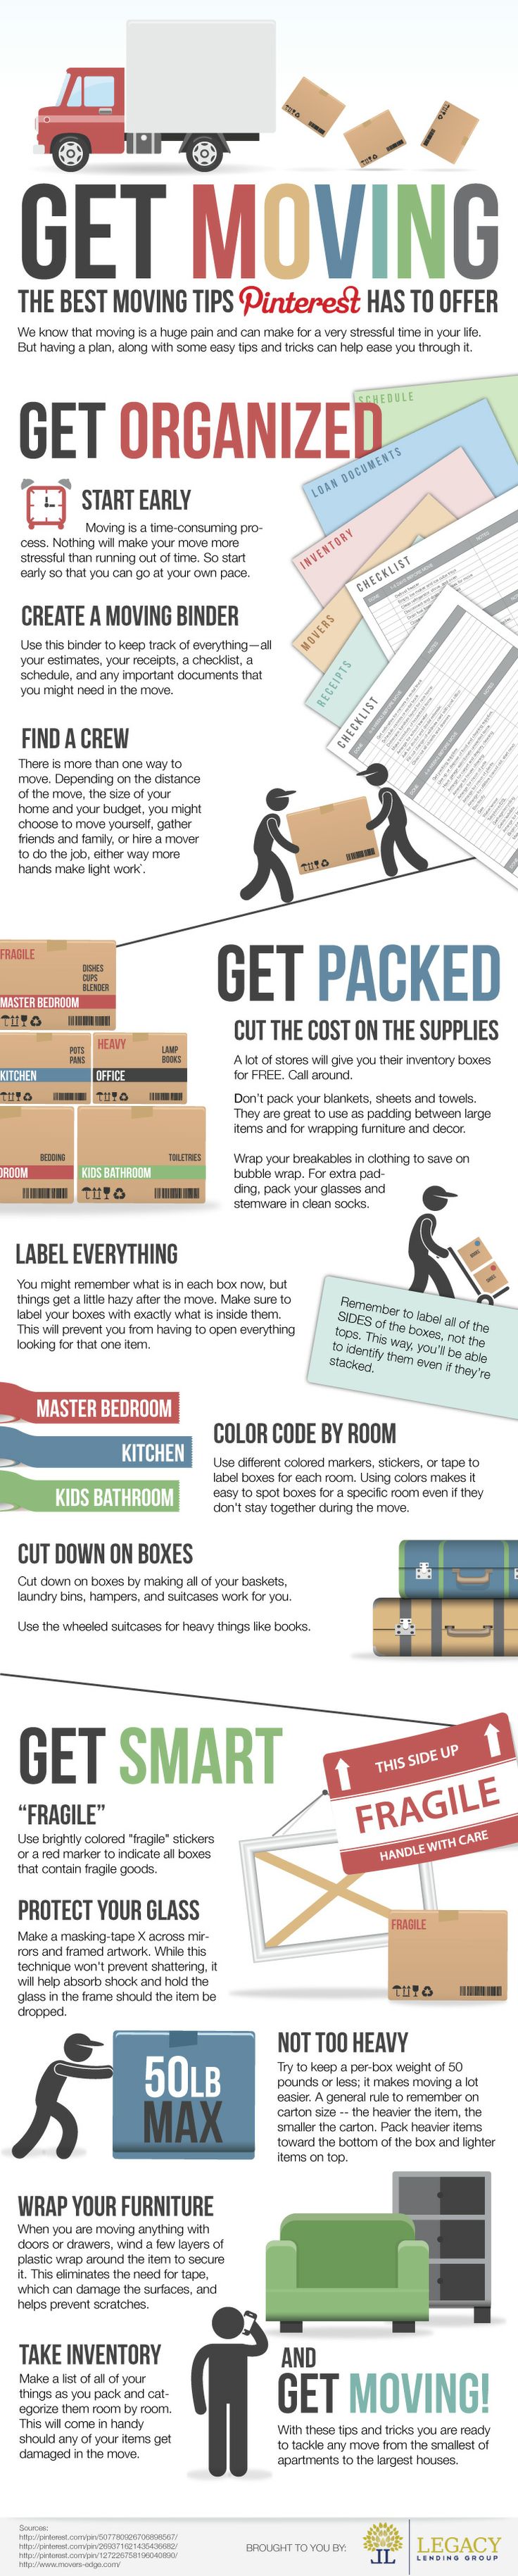 more_moving_tips_3659